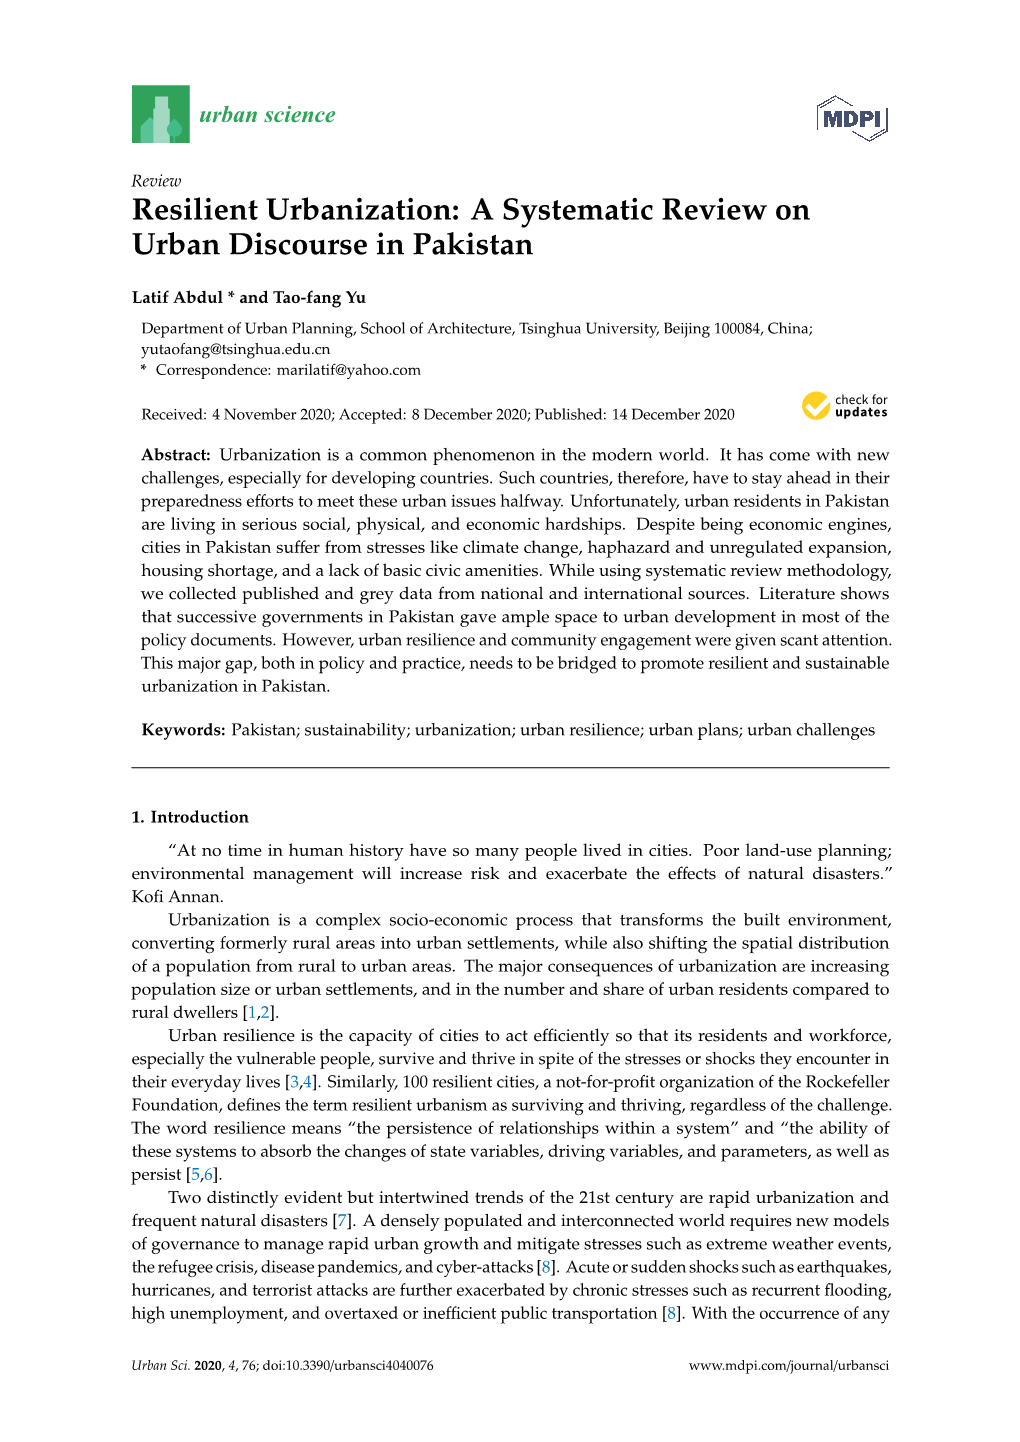 A Systematic Review on Urban Discourse in Pakistan